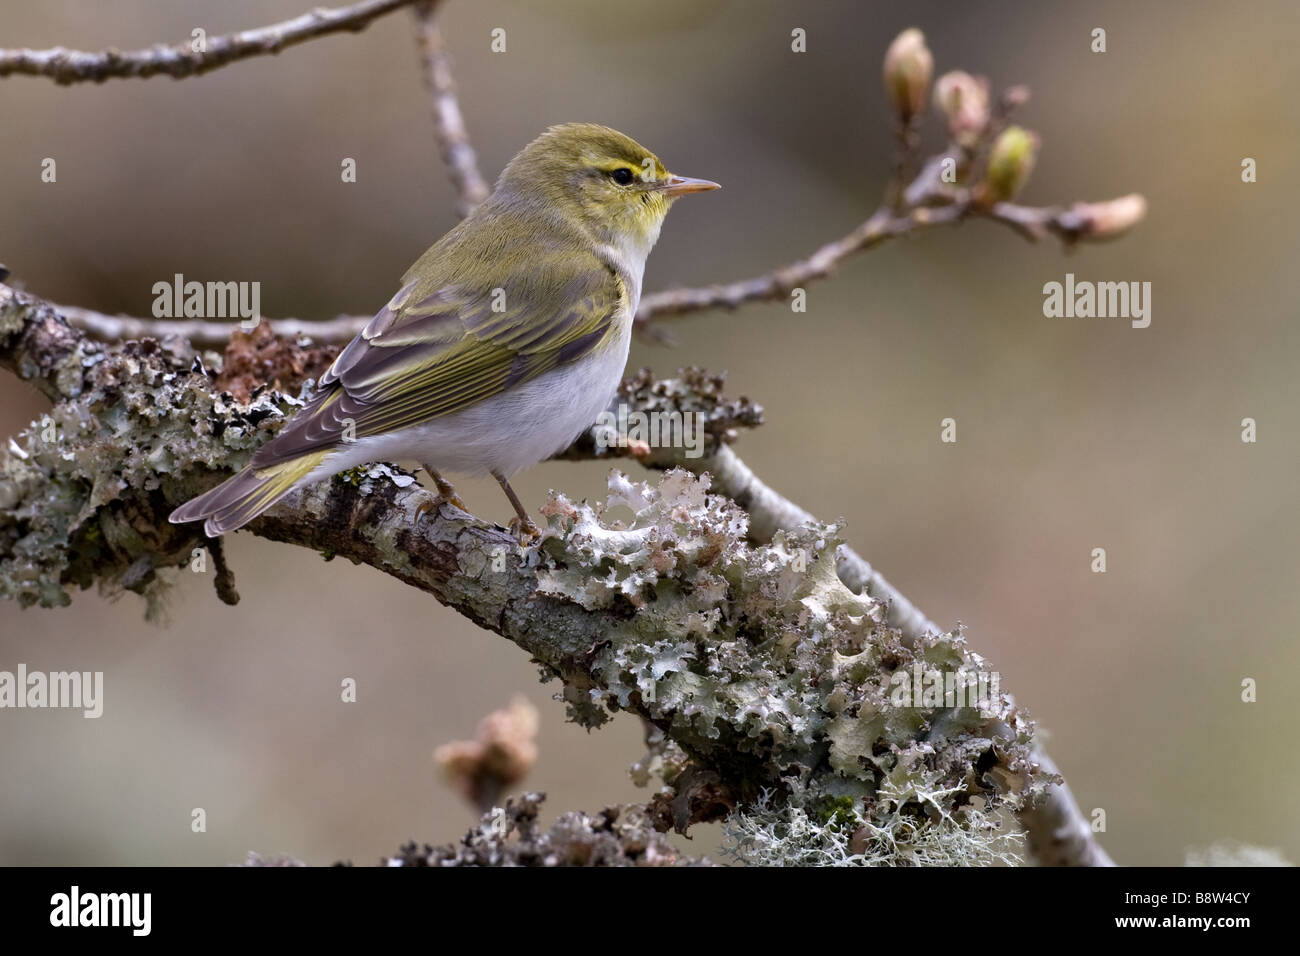 Wood Warbler, Phylloscopus sibilatrix, perched on oak branch in early spring Stock Photo